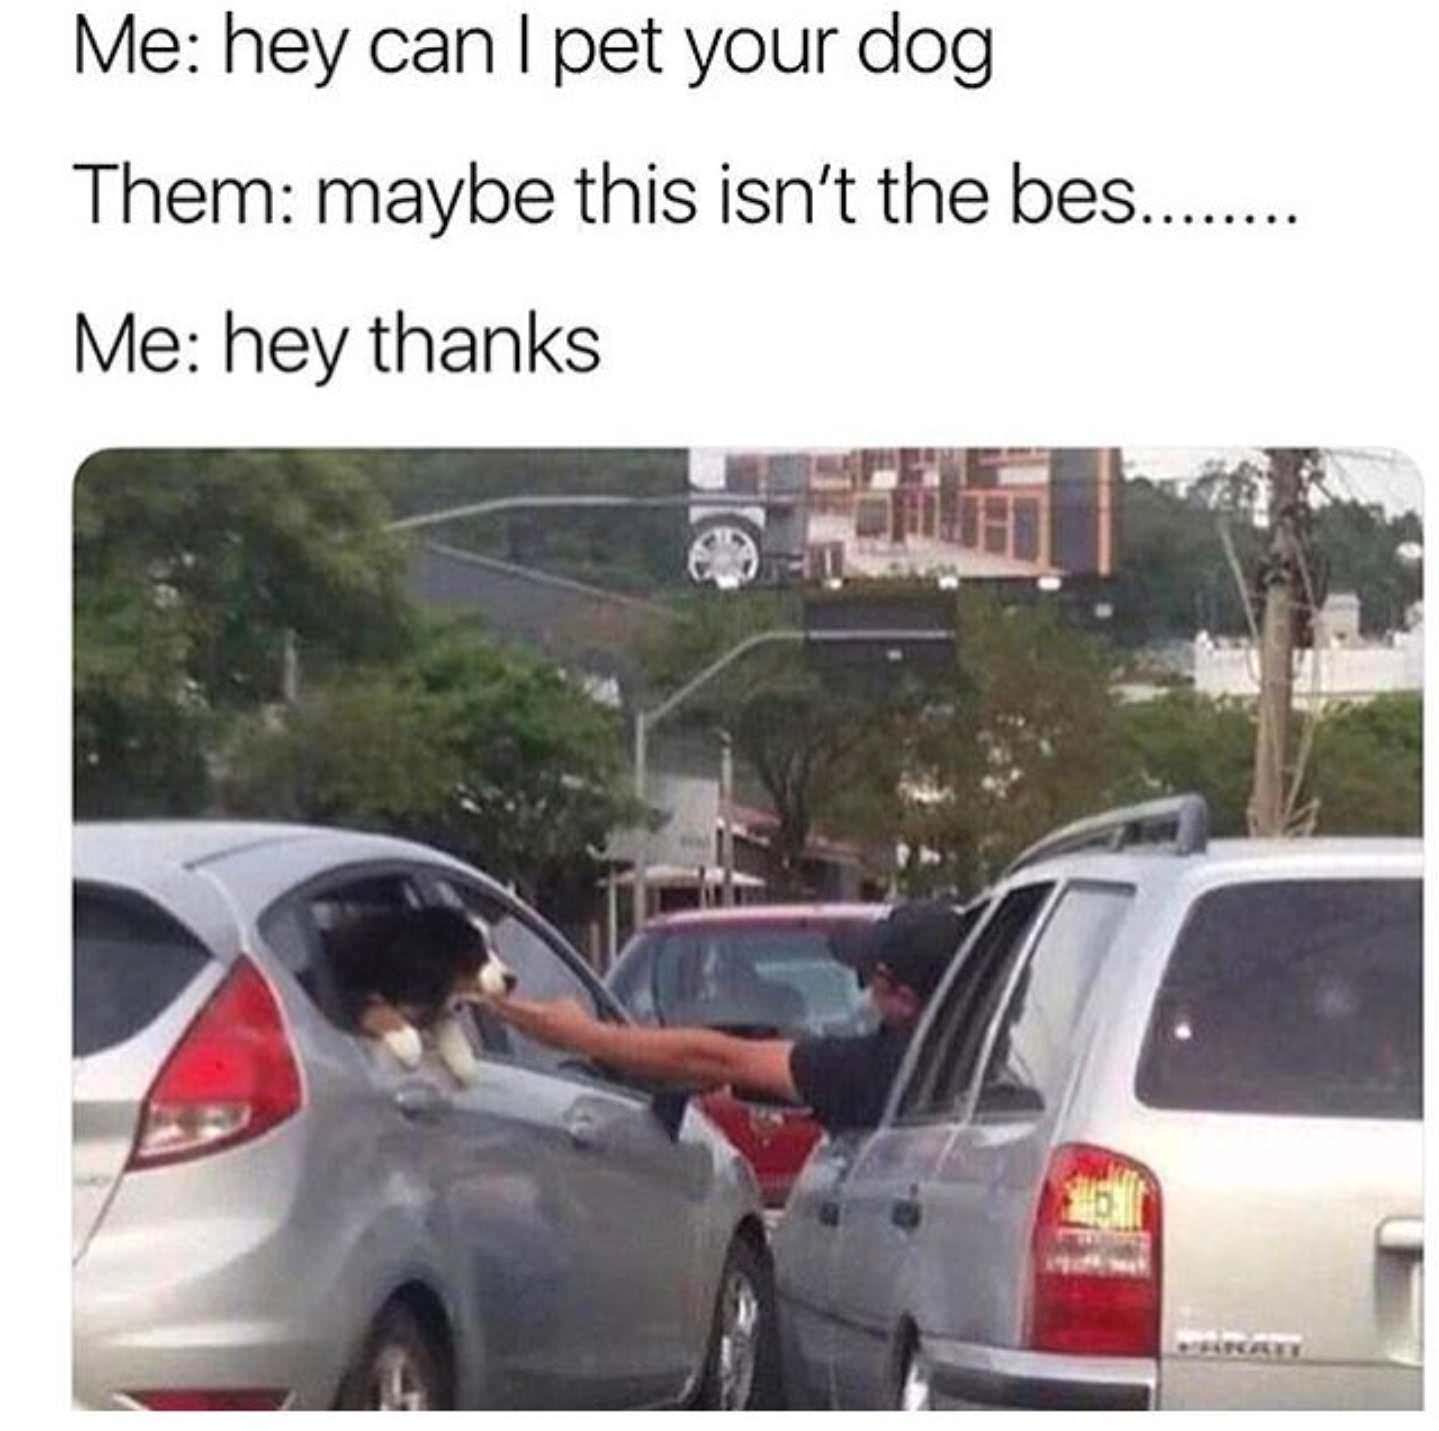 can i pet your dog meme - Me hey can I pet your dog Them maybe this isn't the bes........ Me hey thanks